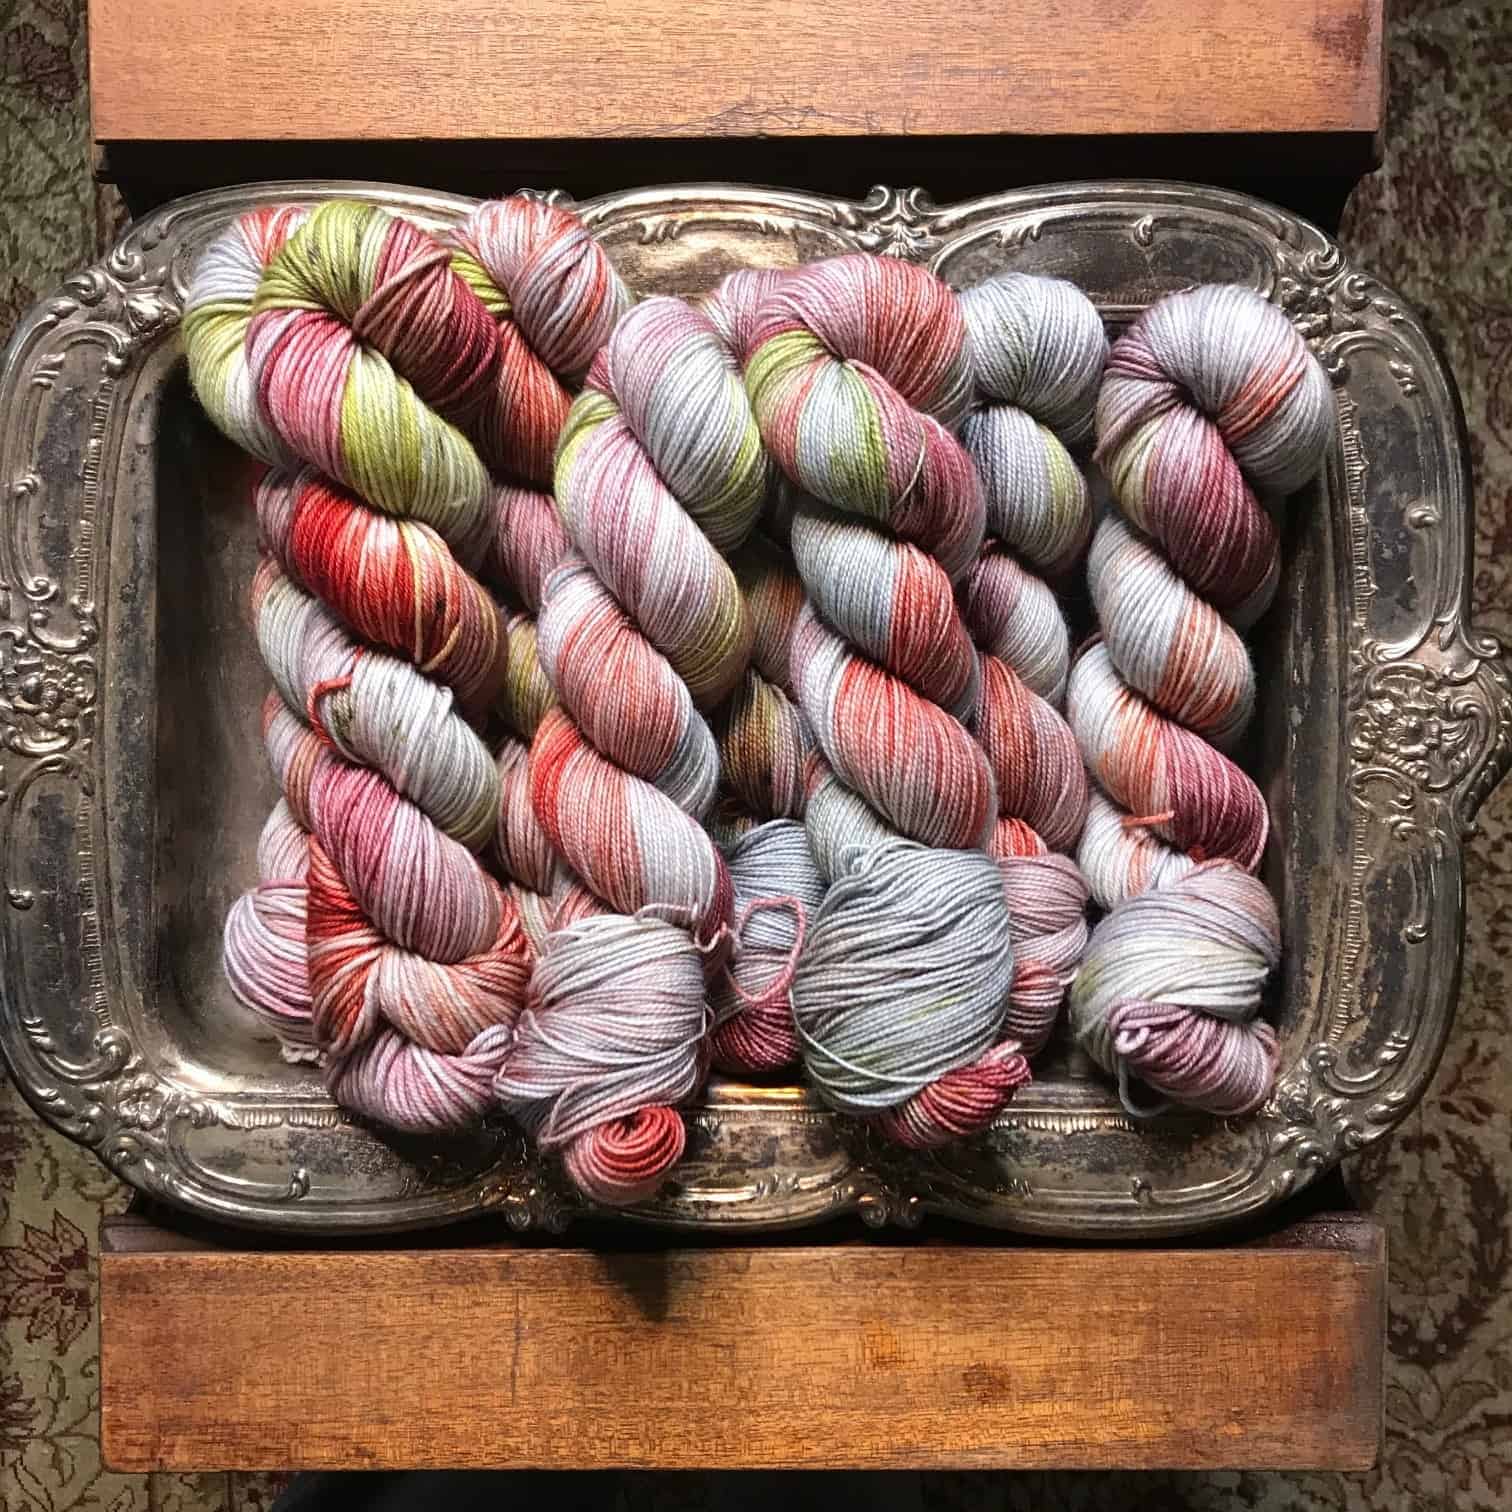 Yarn speckled with red, pink and green on a silver tray.